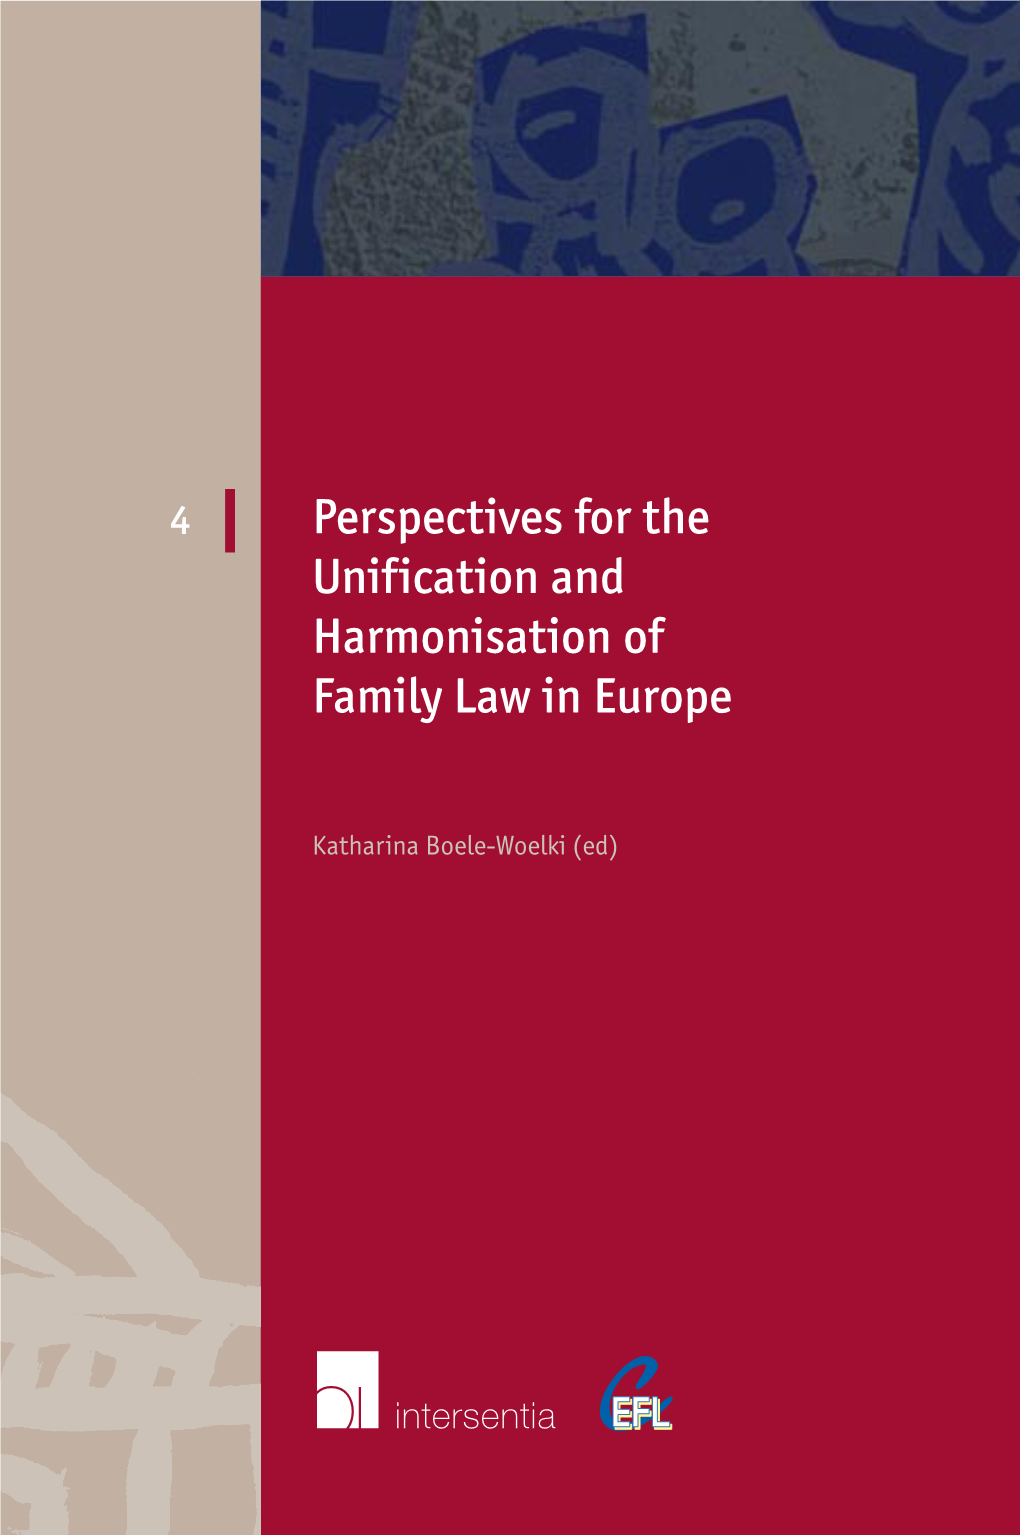 Perspectives for the Unification and Harmonisation of Family Law in Europe Took Place in Utrecht from 11Th - 14Th of December 2002